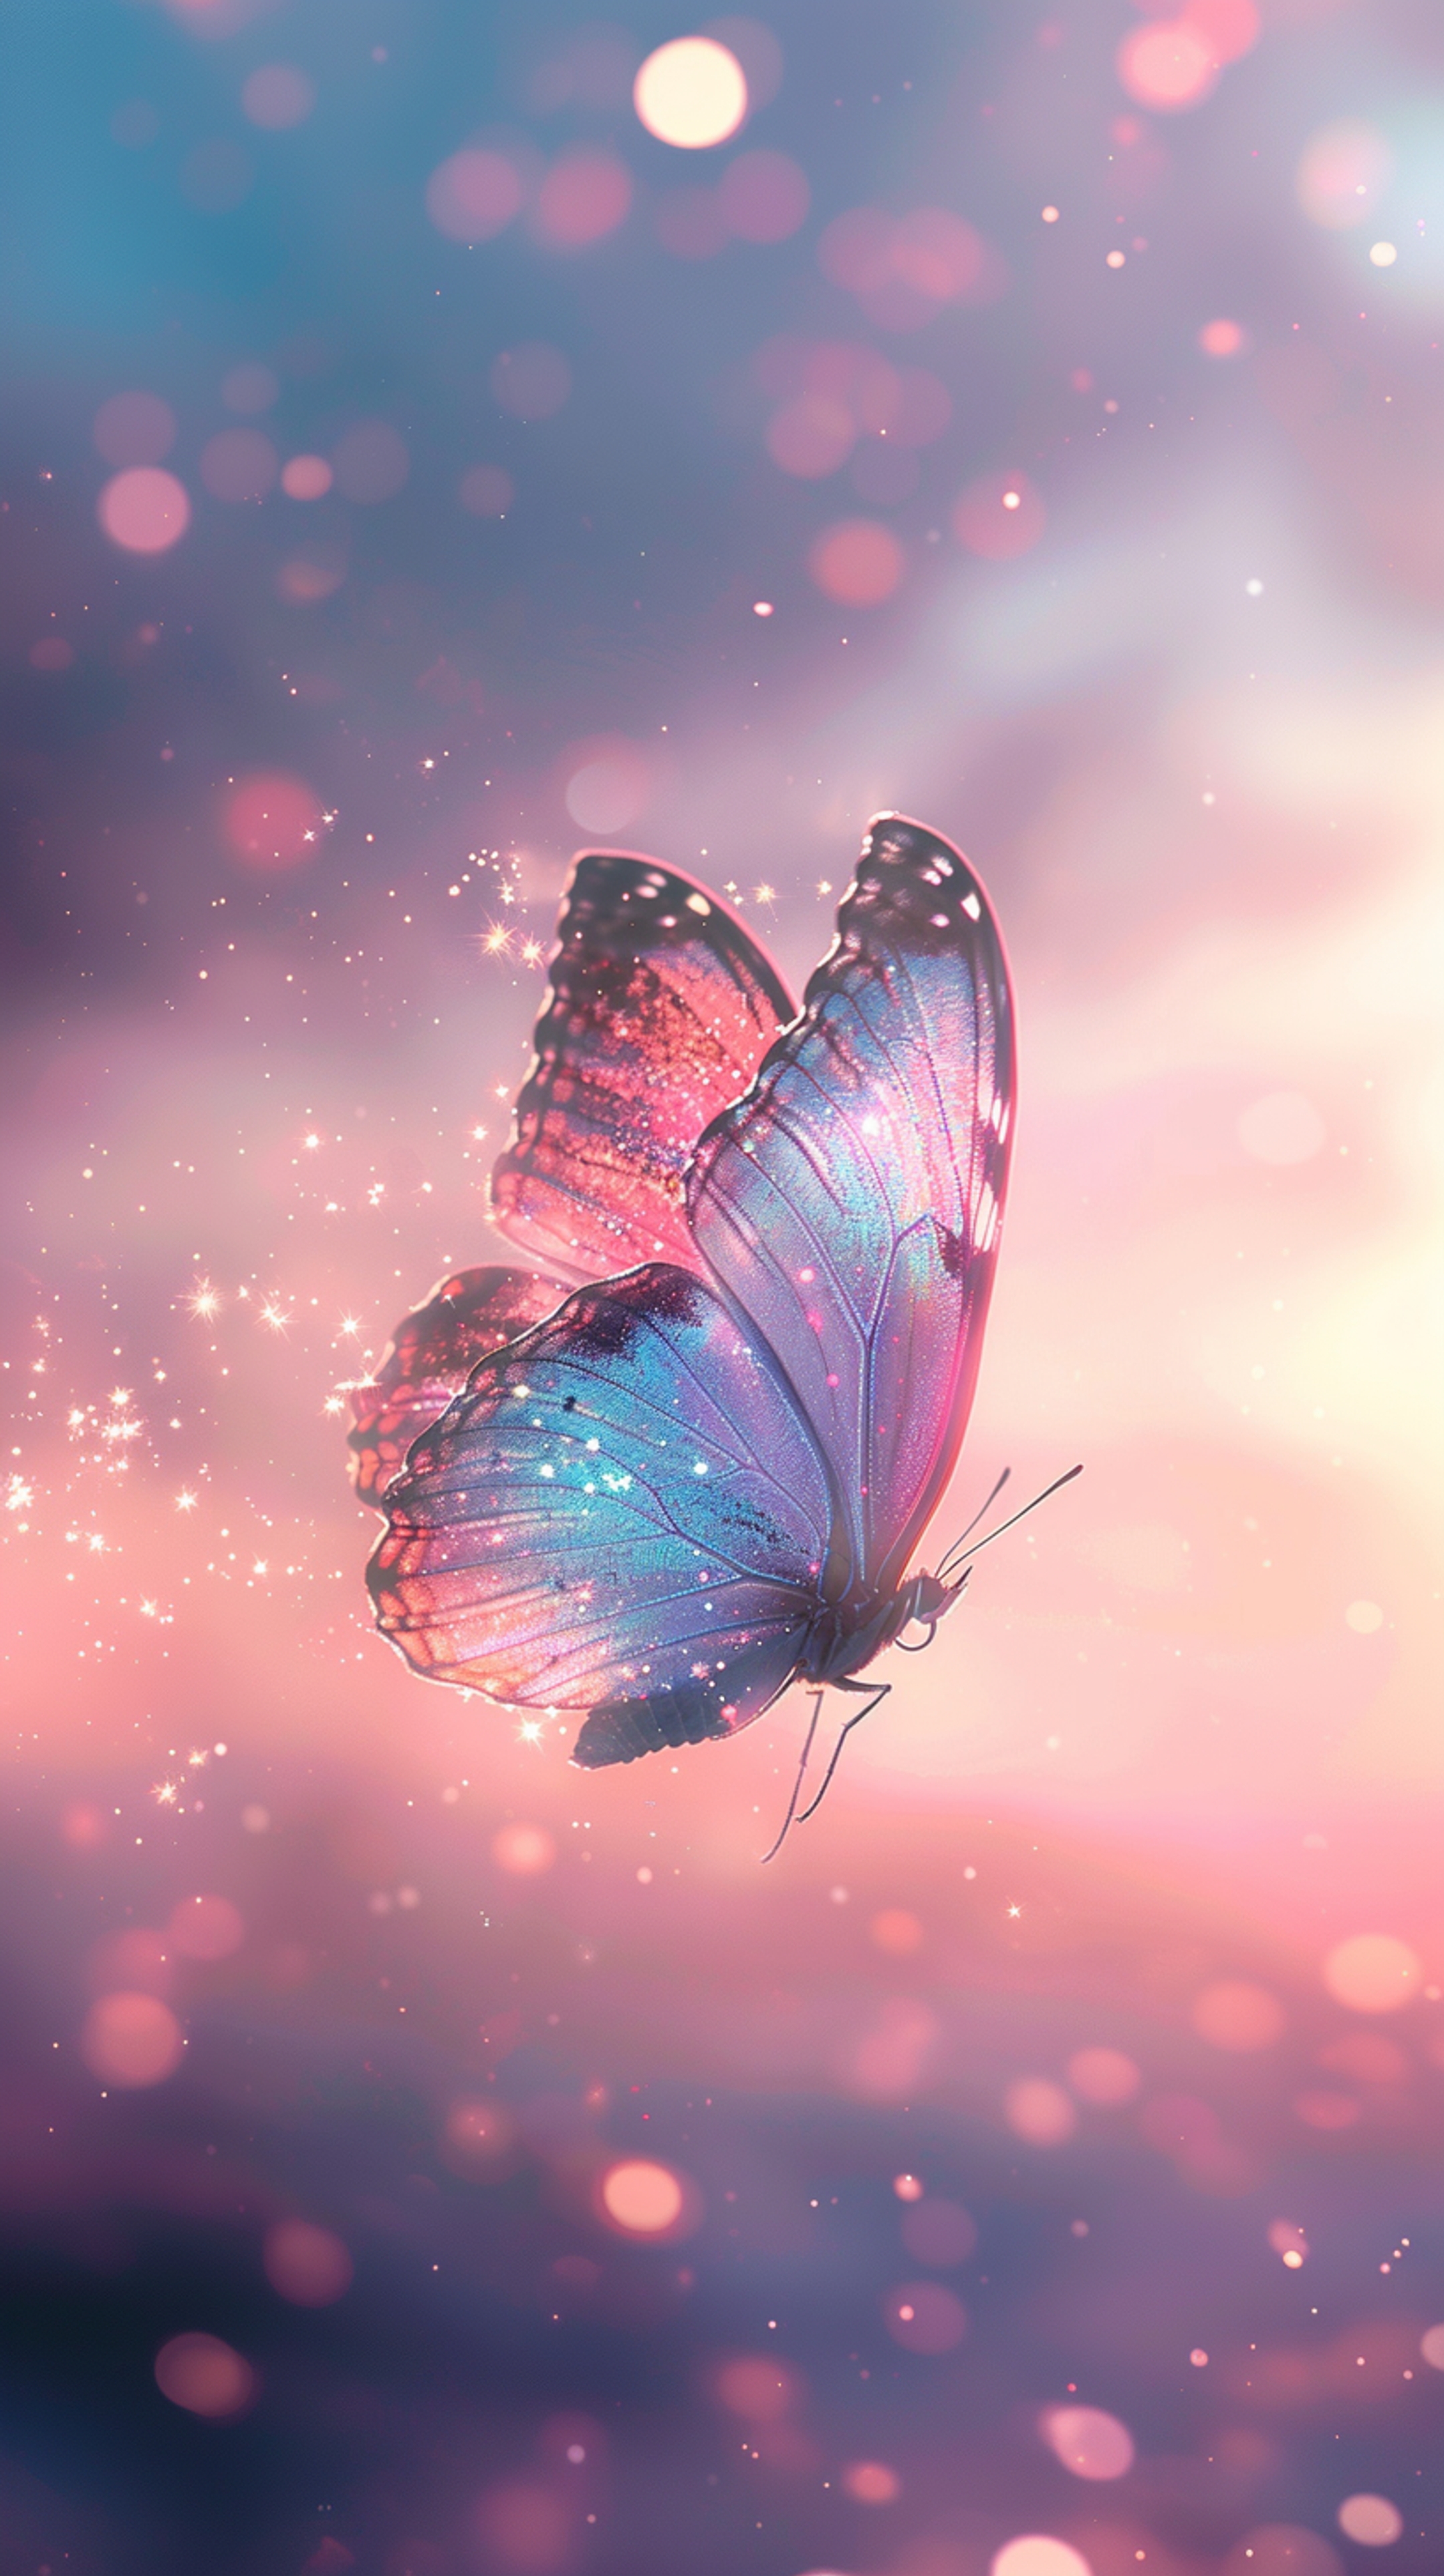 Magical Sparkling Butterfly in Dreamy Pink Sky Wallpaper[1278b2409cd84640a5d9]